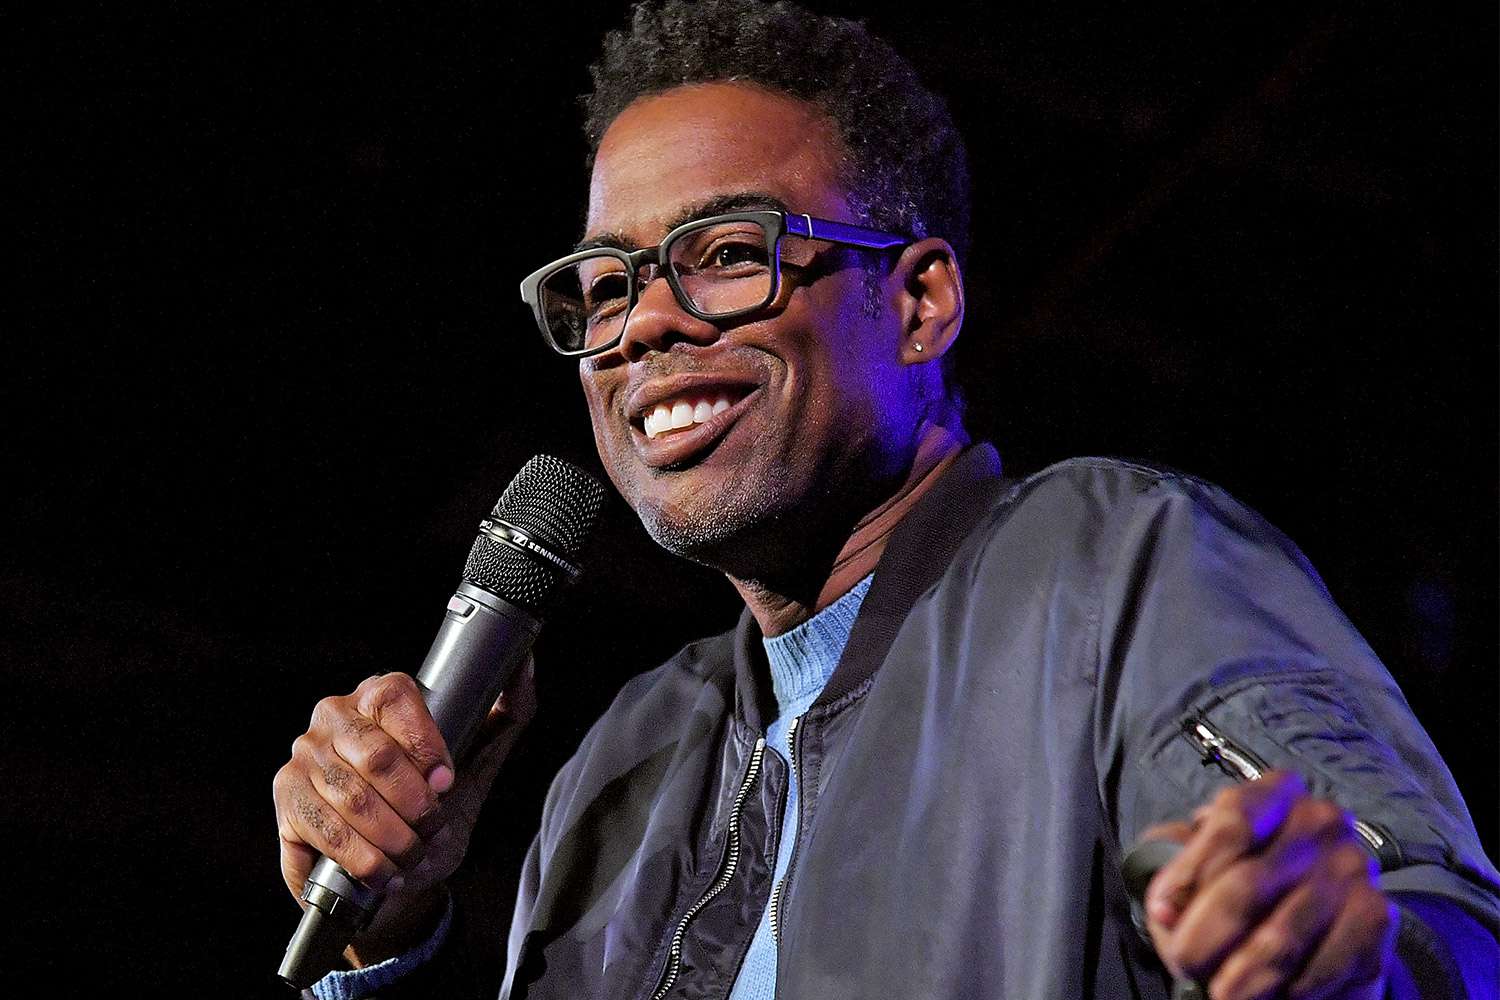 Chris Rock Jokes He Got His Hearing Back After Will Smith Oscars Slap |  PEOPLE.com